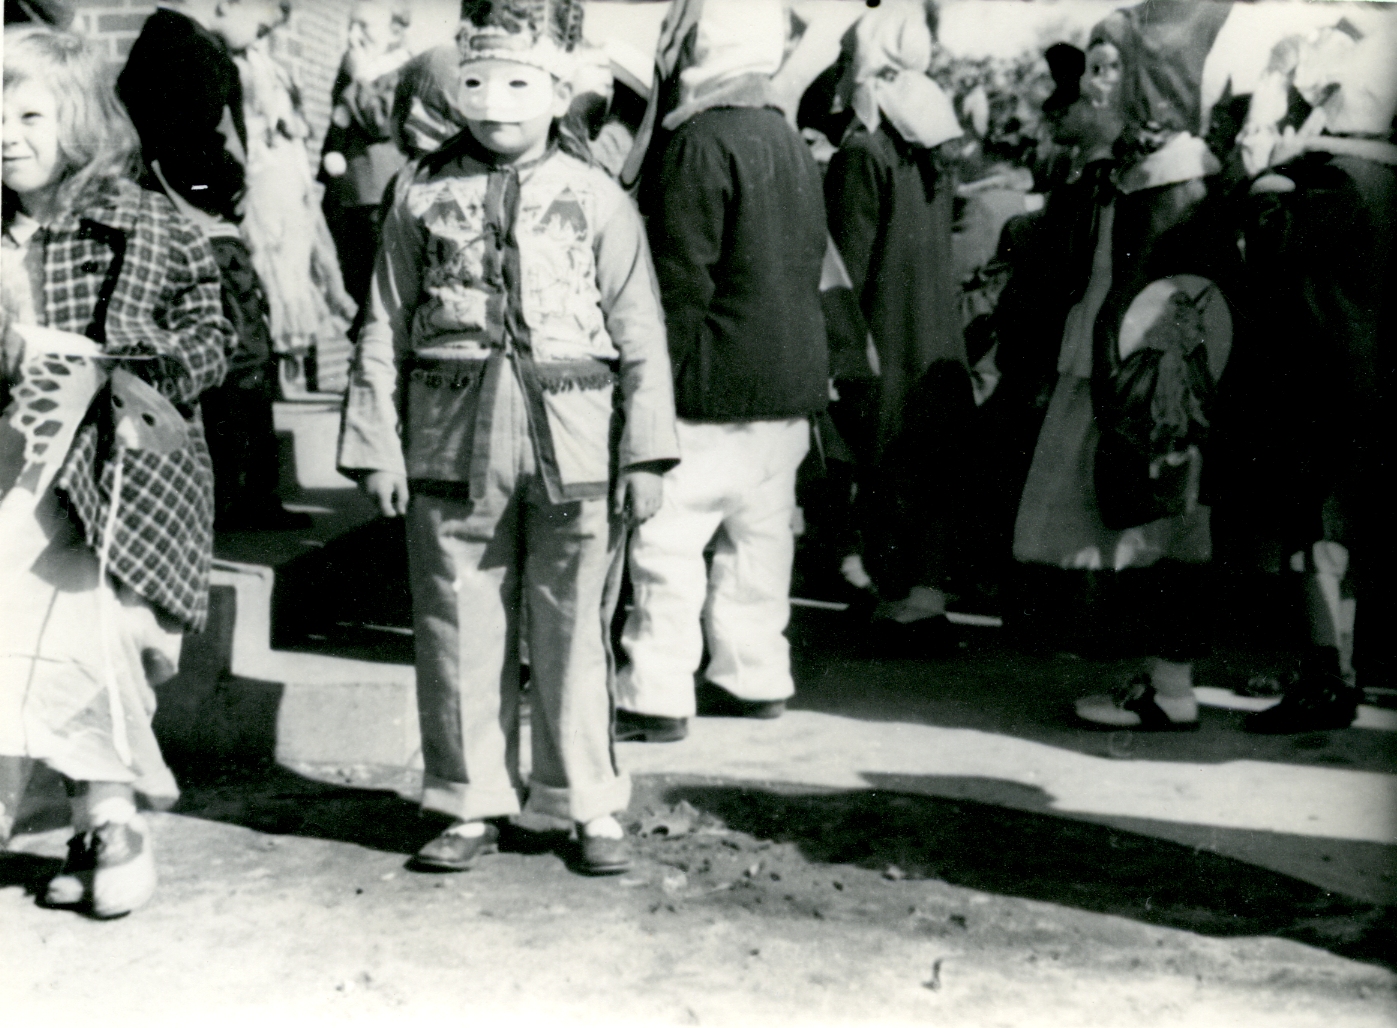 a  in costume standing next to an older man